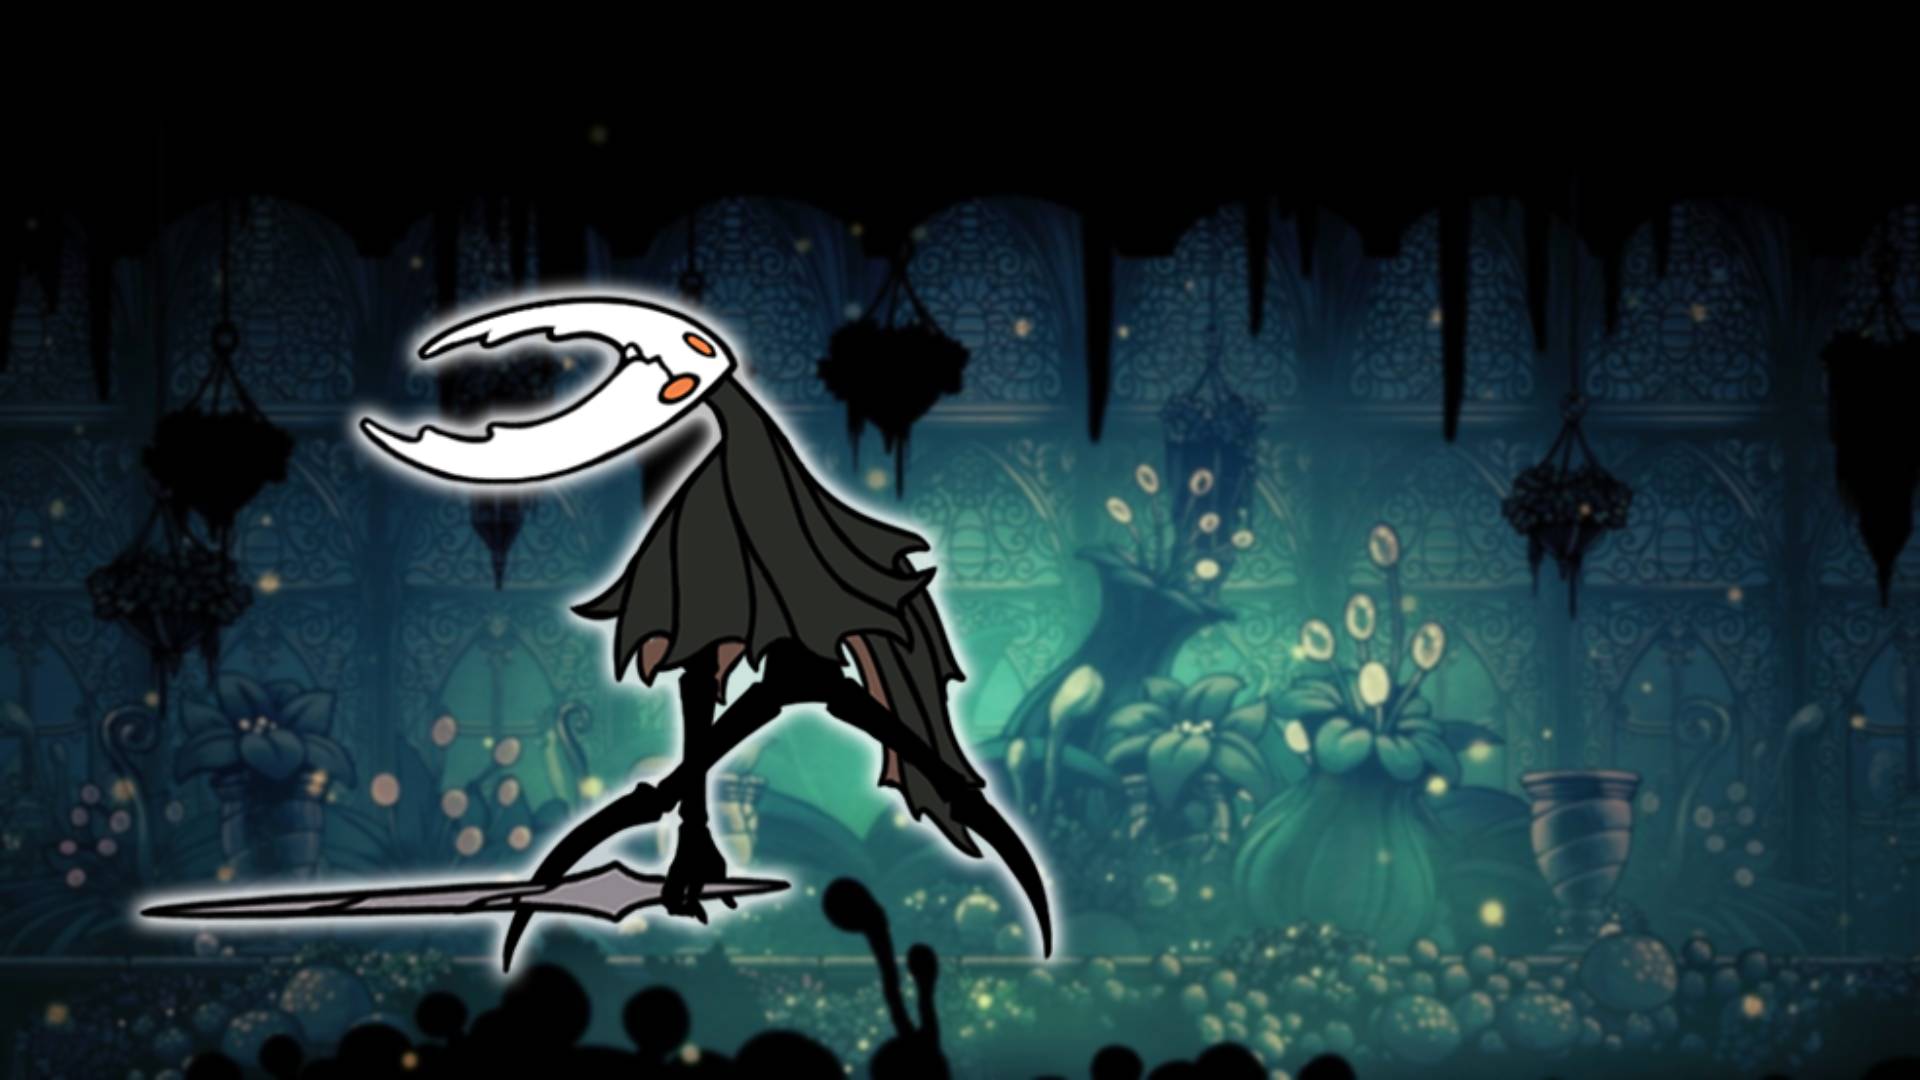 The Hollow Knight - the Hollow Knight boss, is visible against a mossy green background area from Hollow Knight 